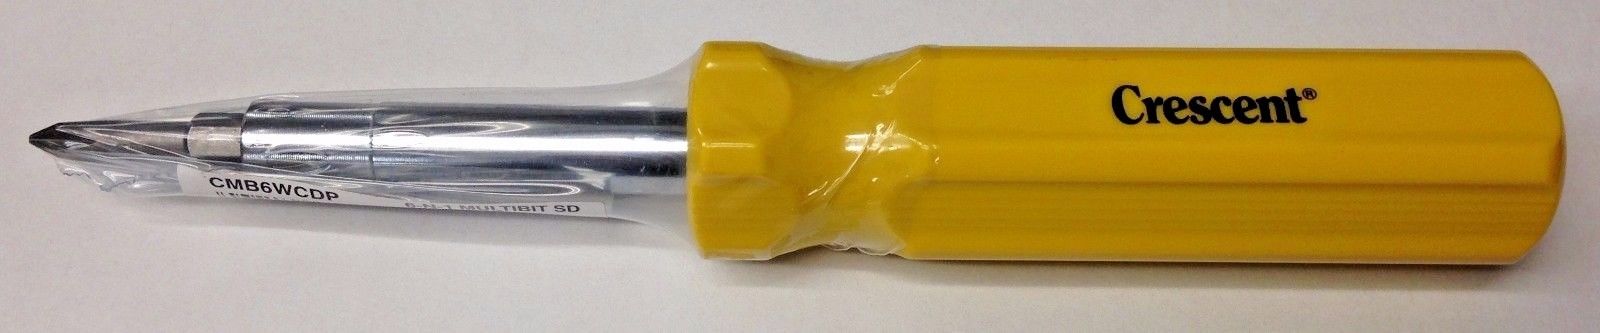 Crescent CMB6WCDP Yellow 6-in-1 Screwdriver